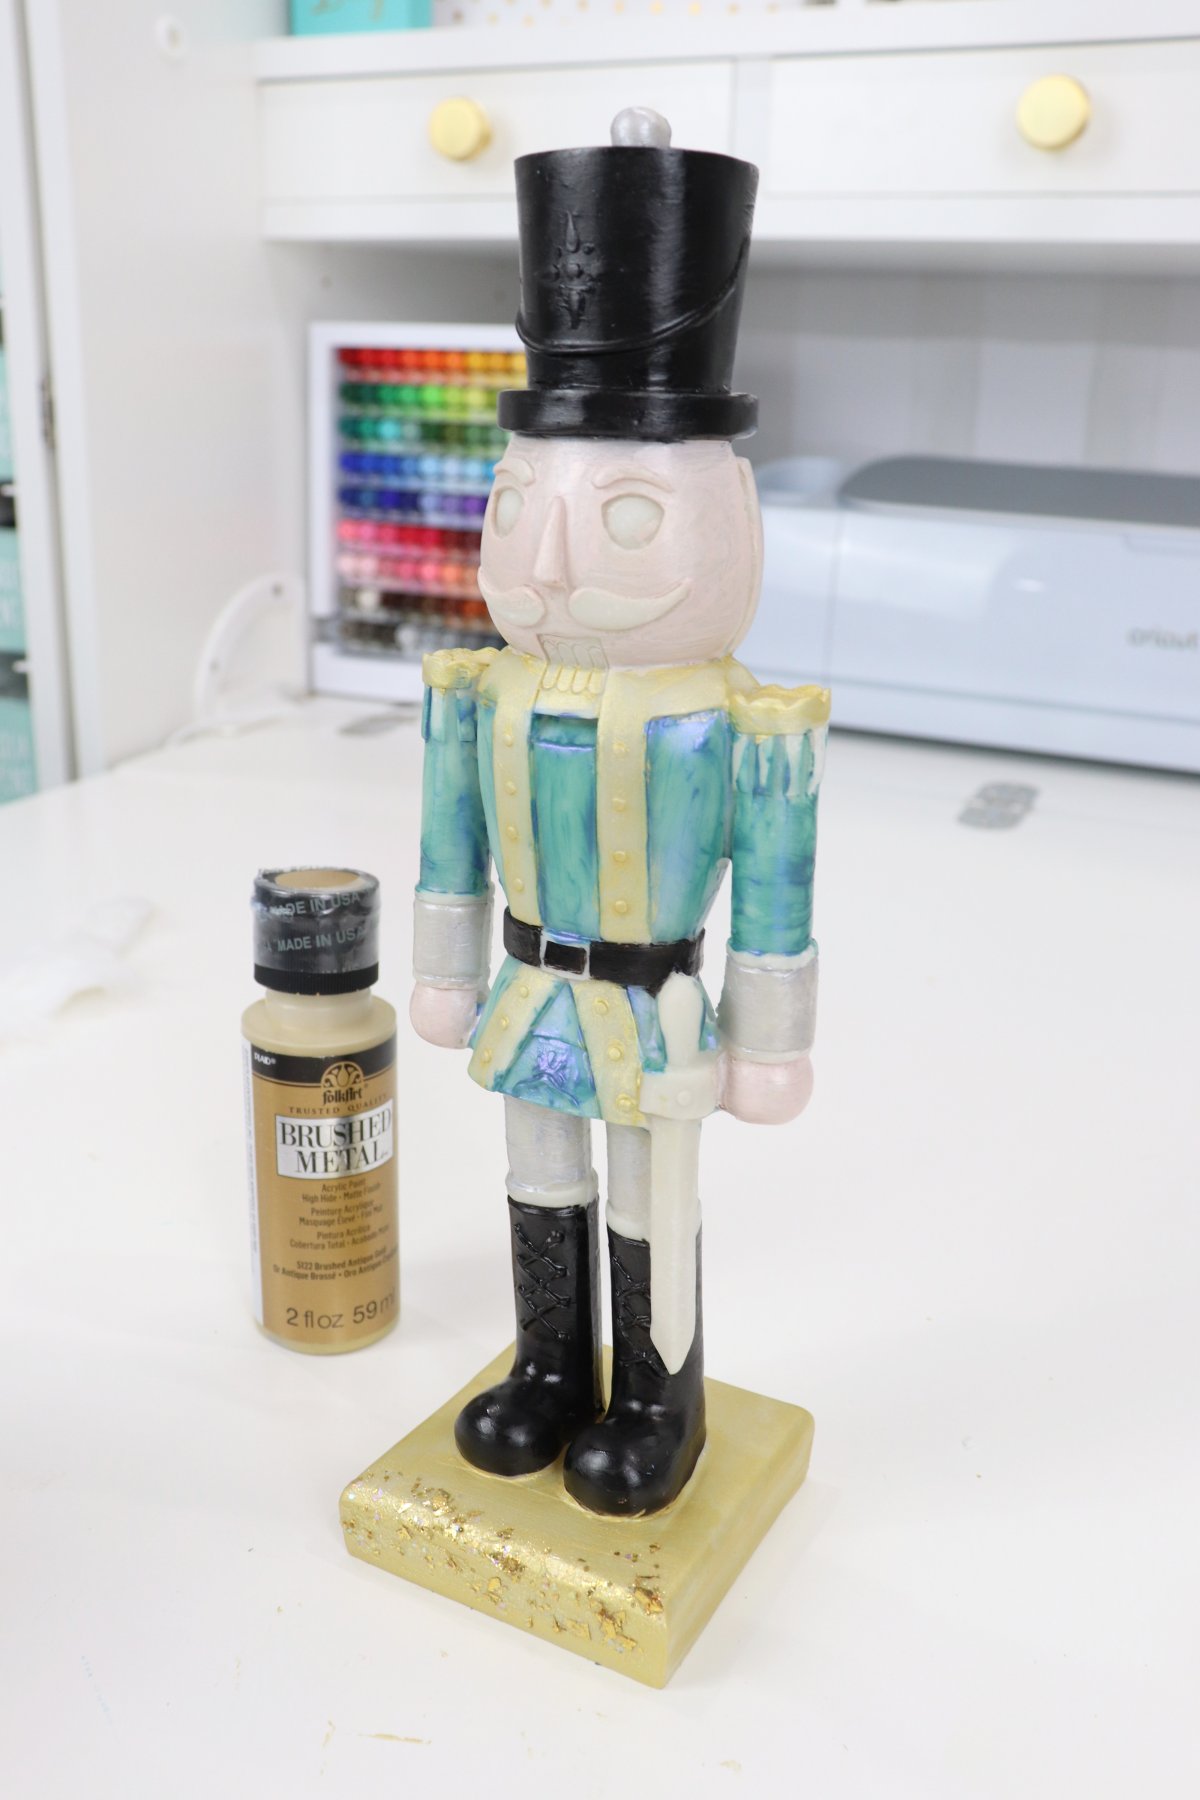 Image contains a partially painted nutcracker figurine with a bottle of gold paint beside it.